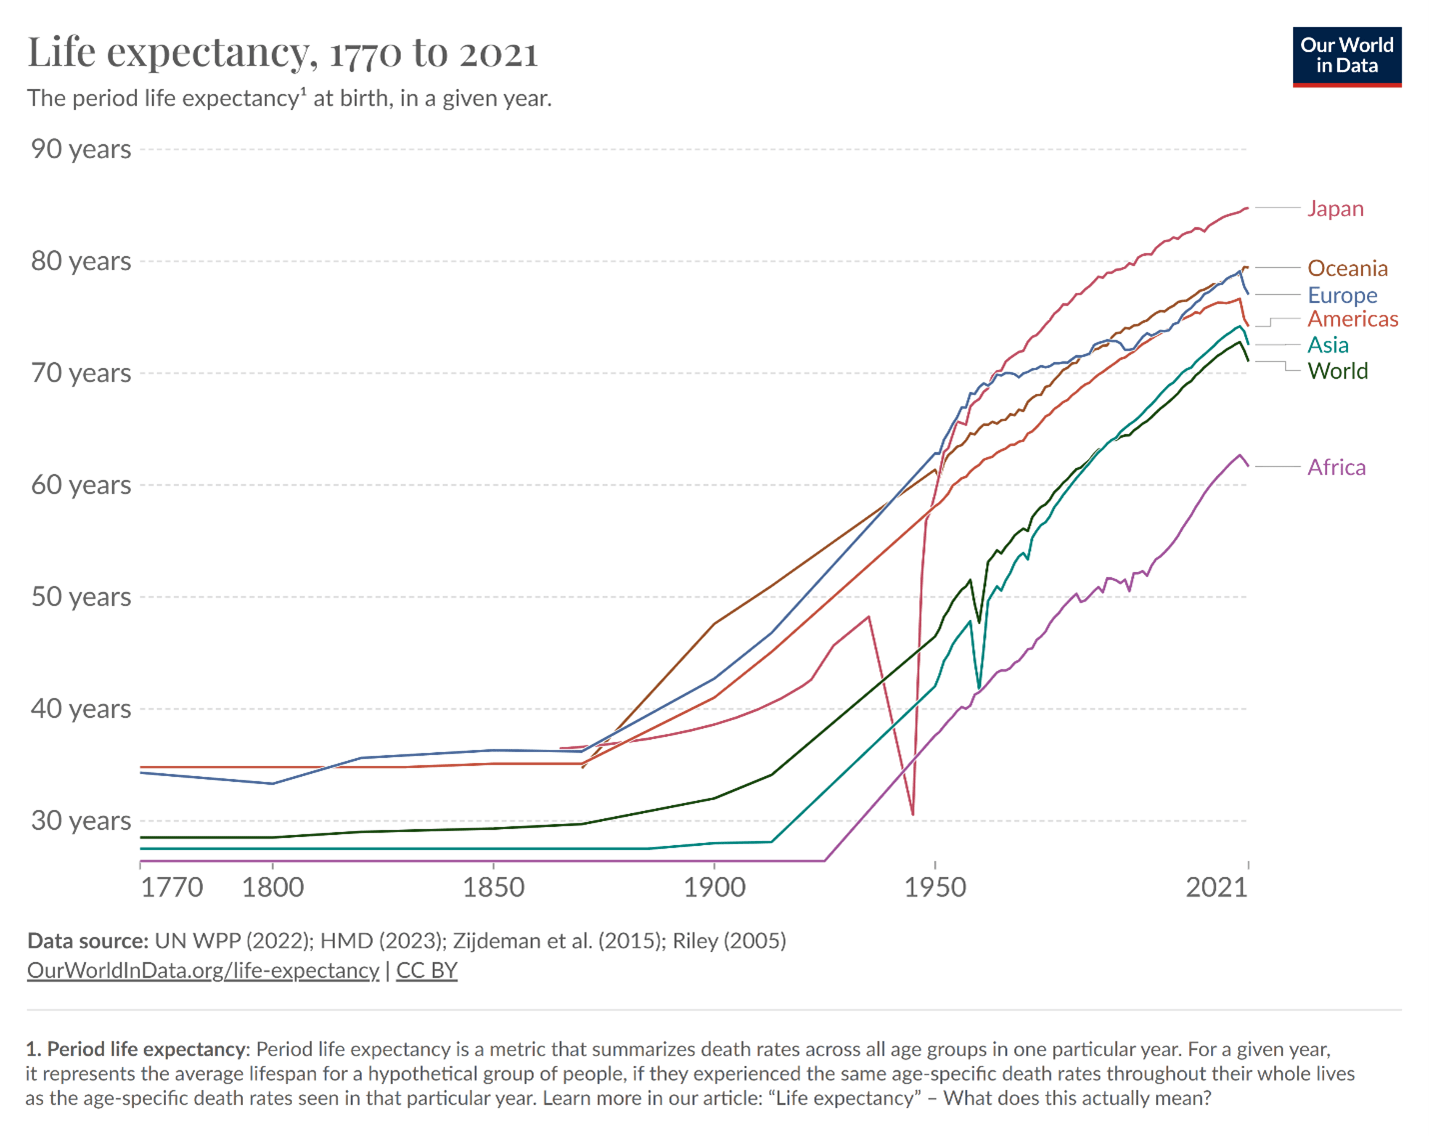 A graph showing life expectancy in different regions over time.